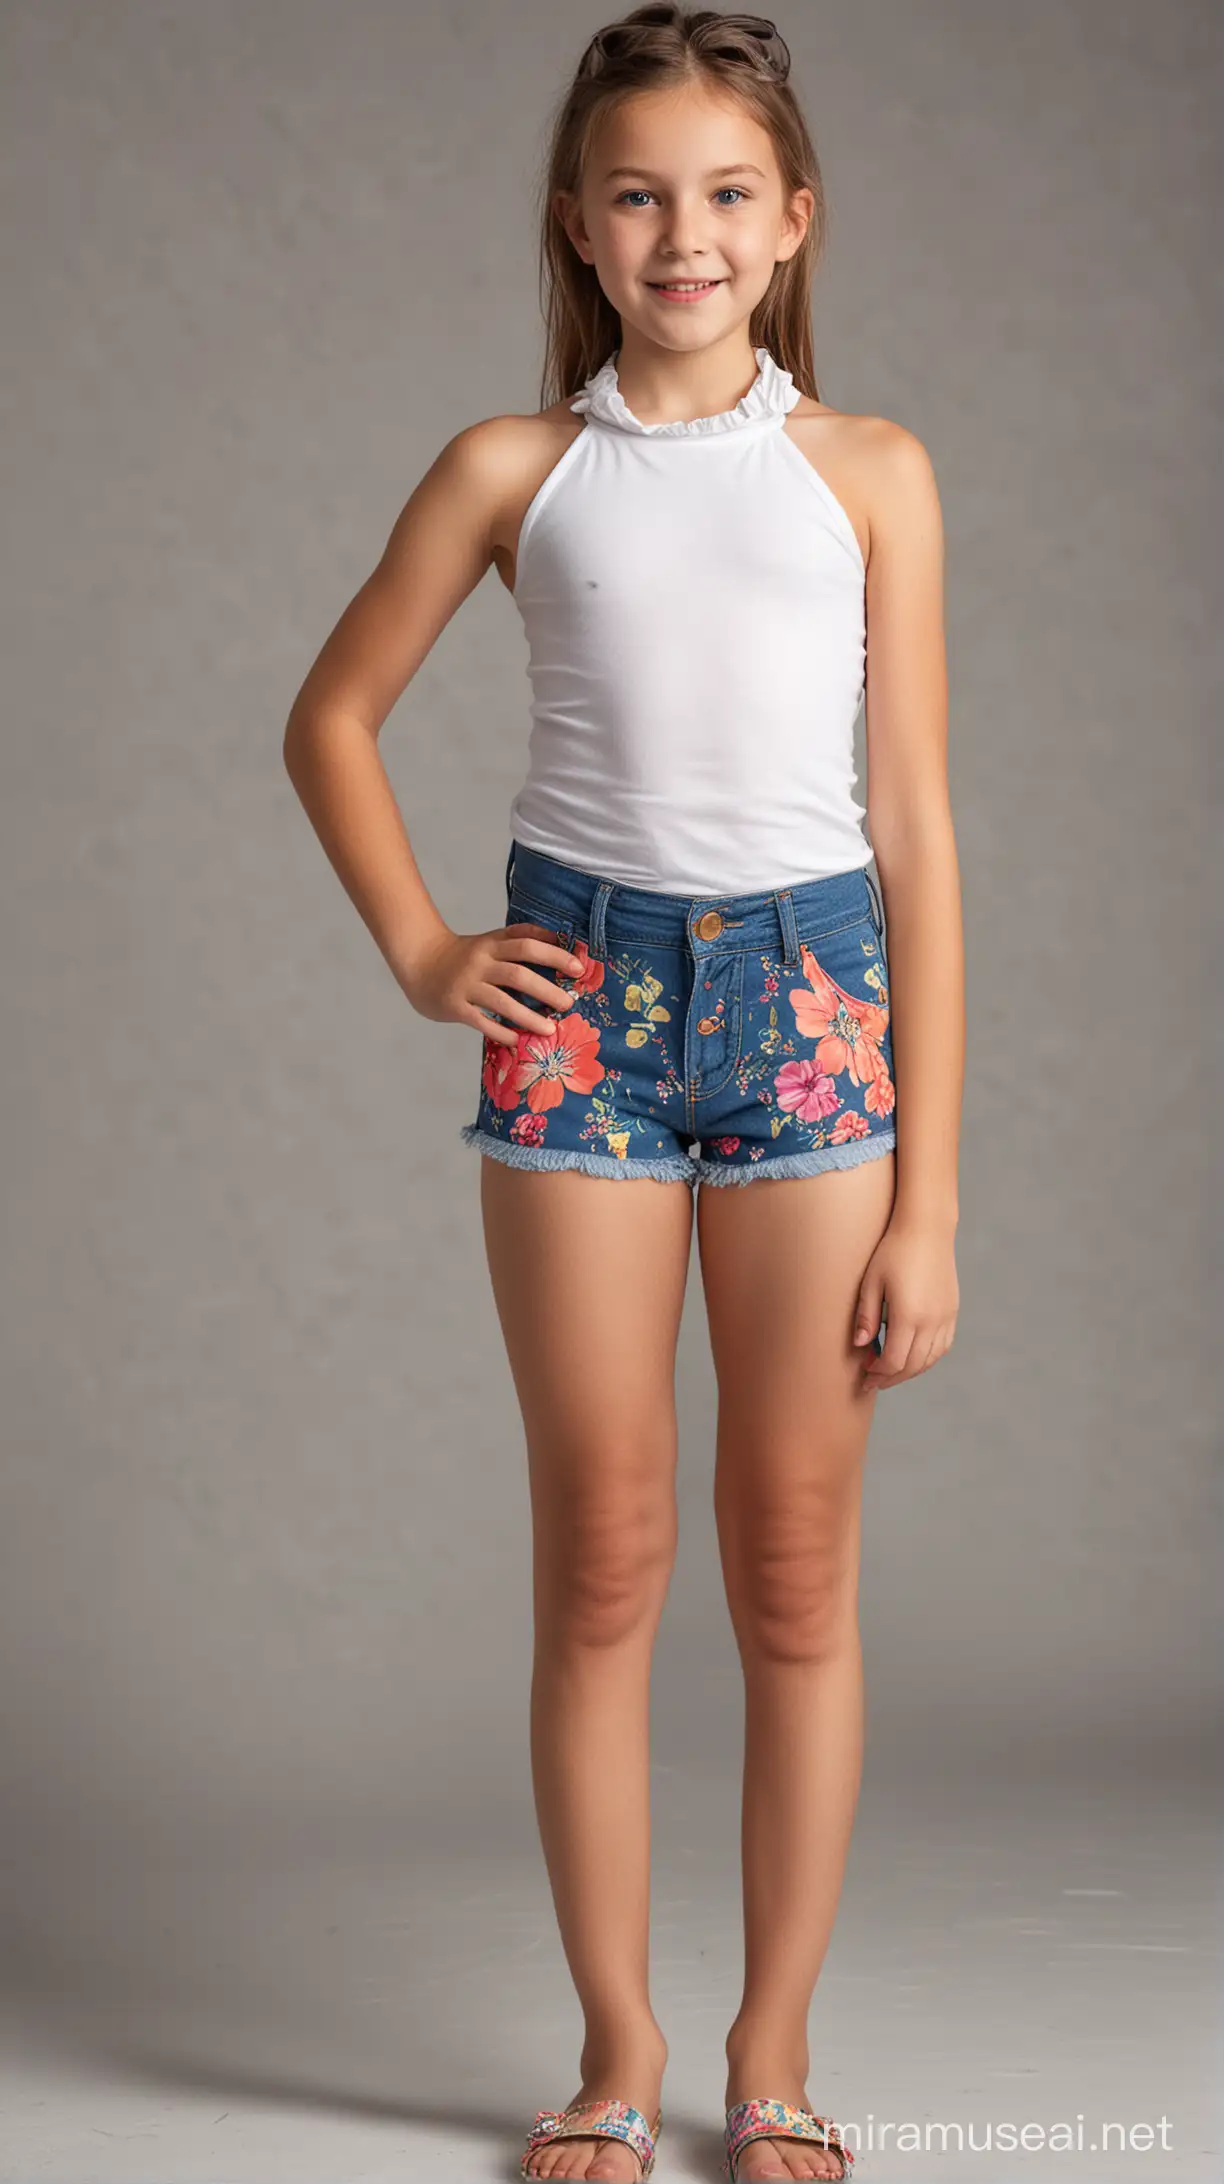 Young Girl in Stylish Halter Neck Top and Shorts